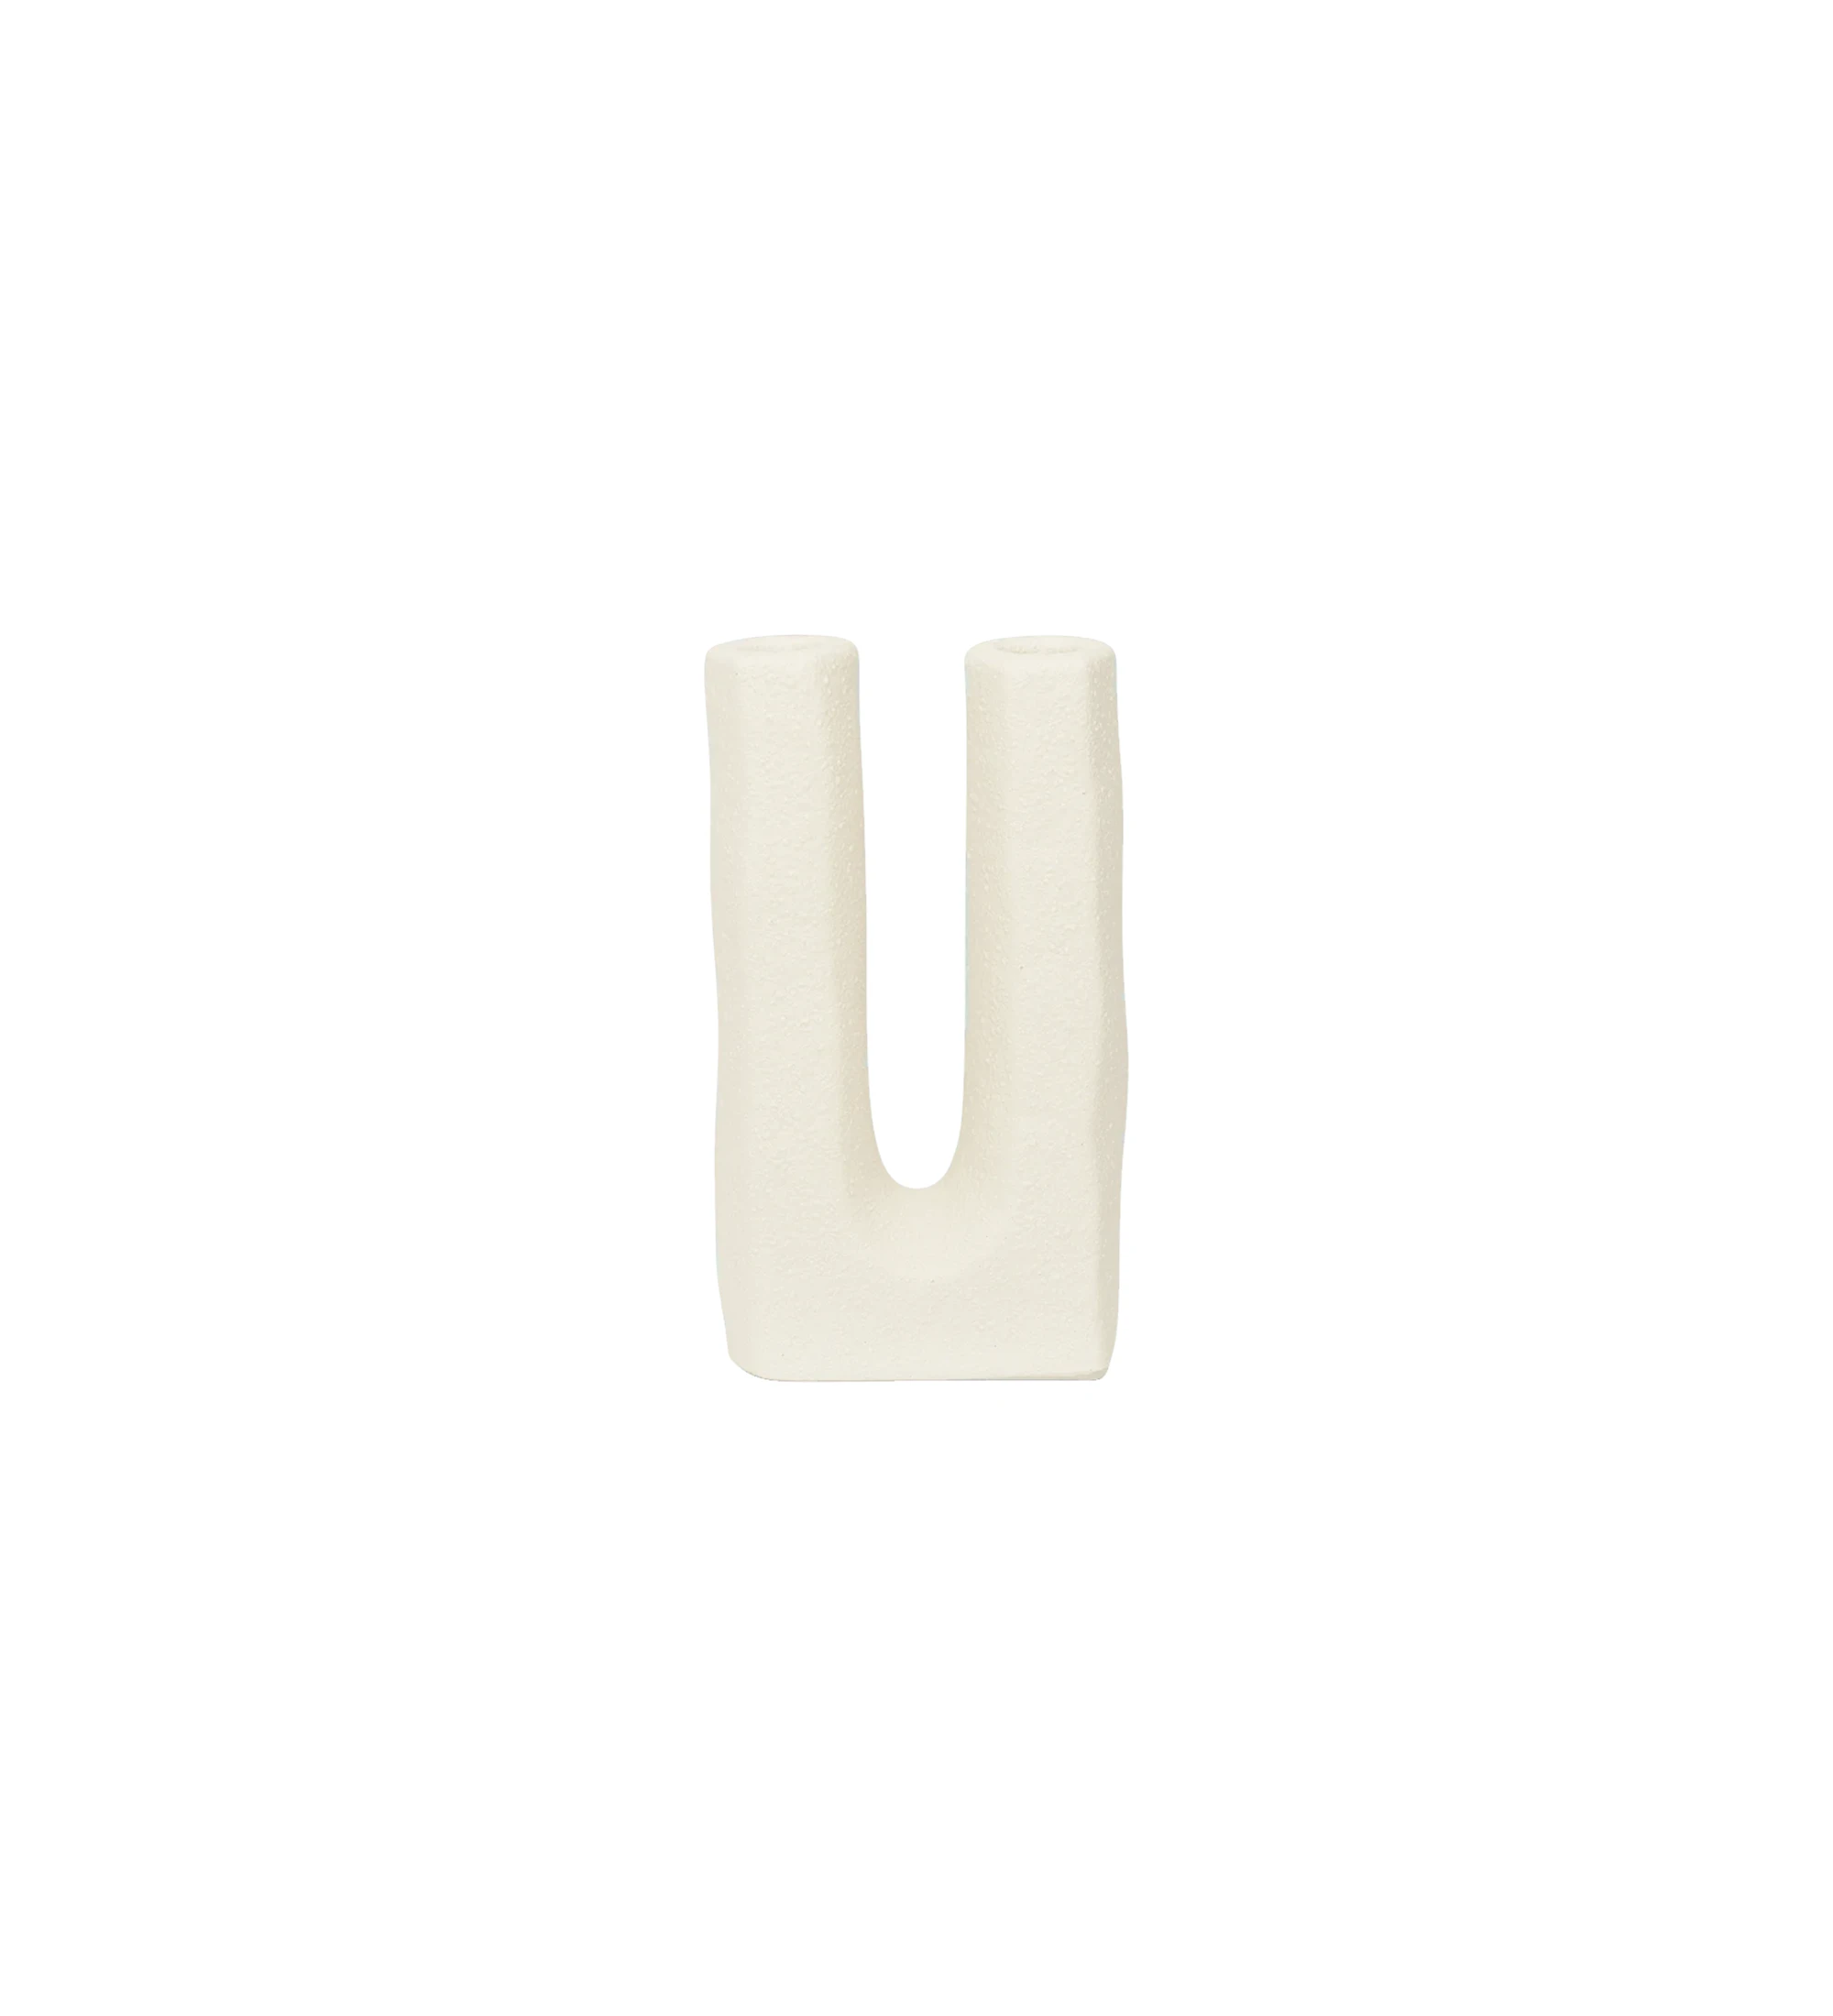 Ceramic candle holder with off-white finish.